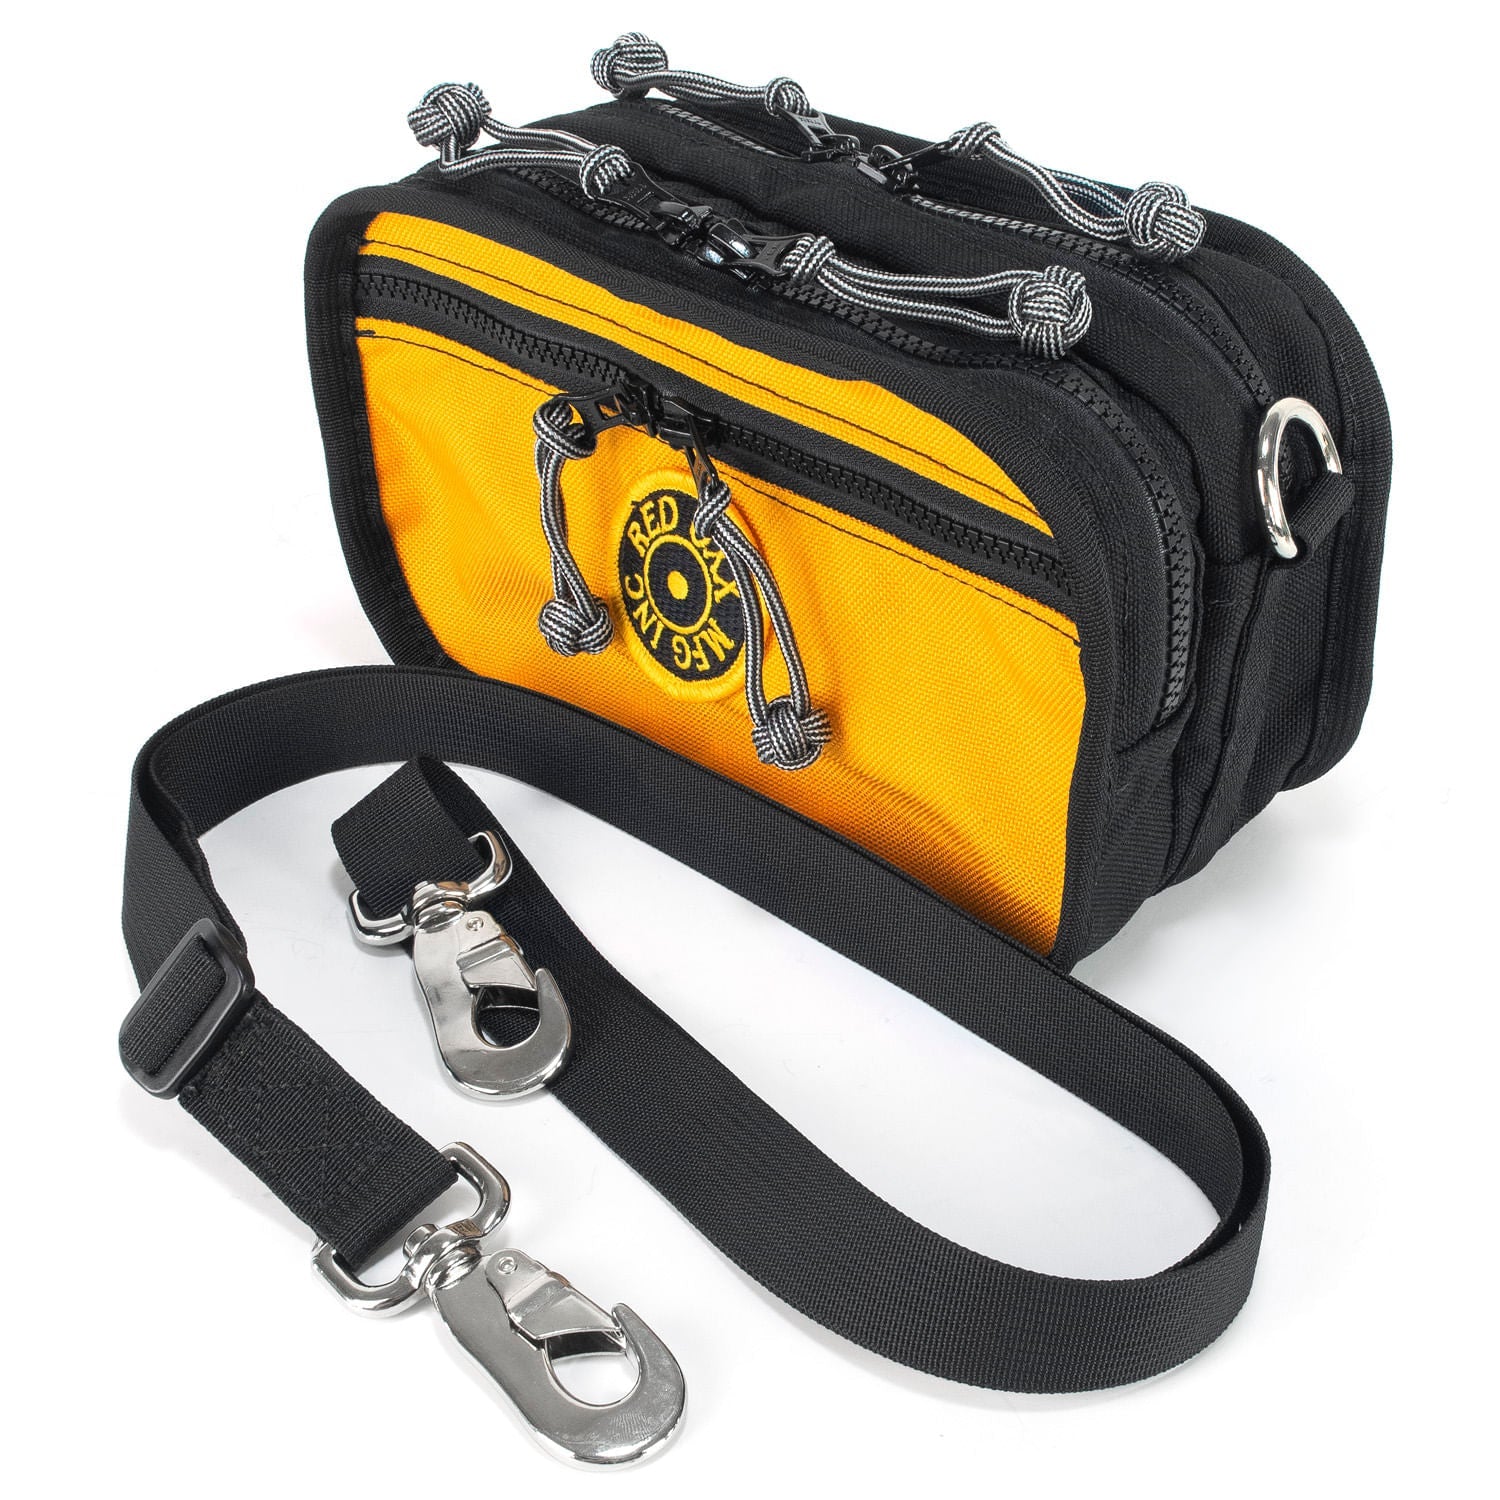 Fanny pack with shoulder strap included.